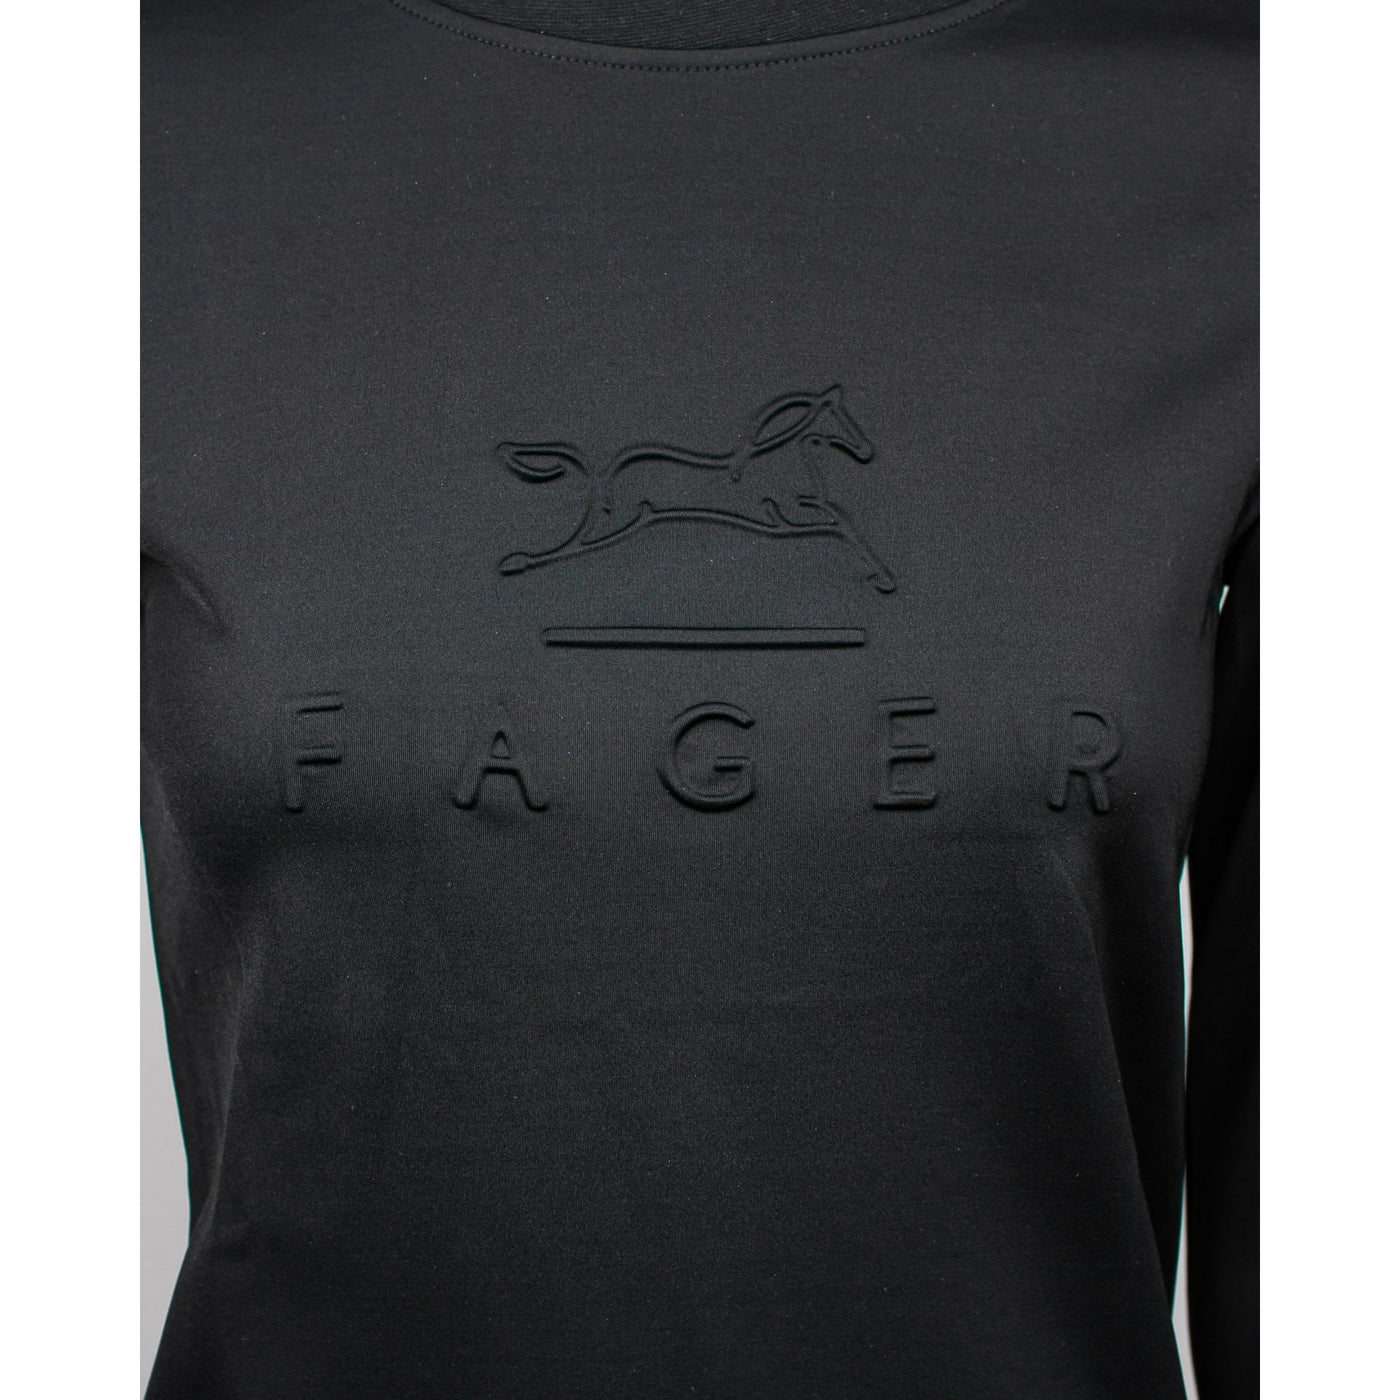 SALE Fager Holly Sweater Black